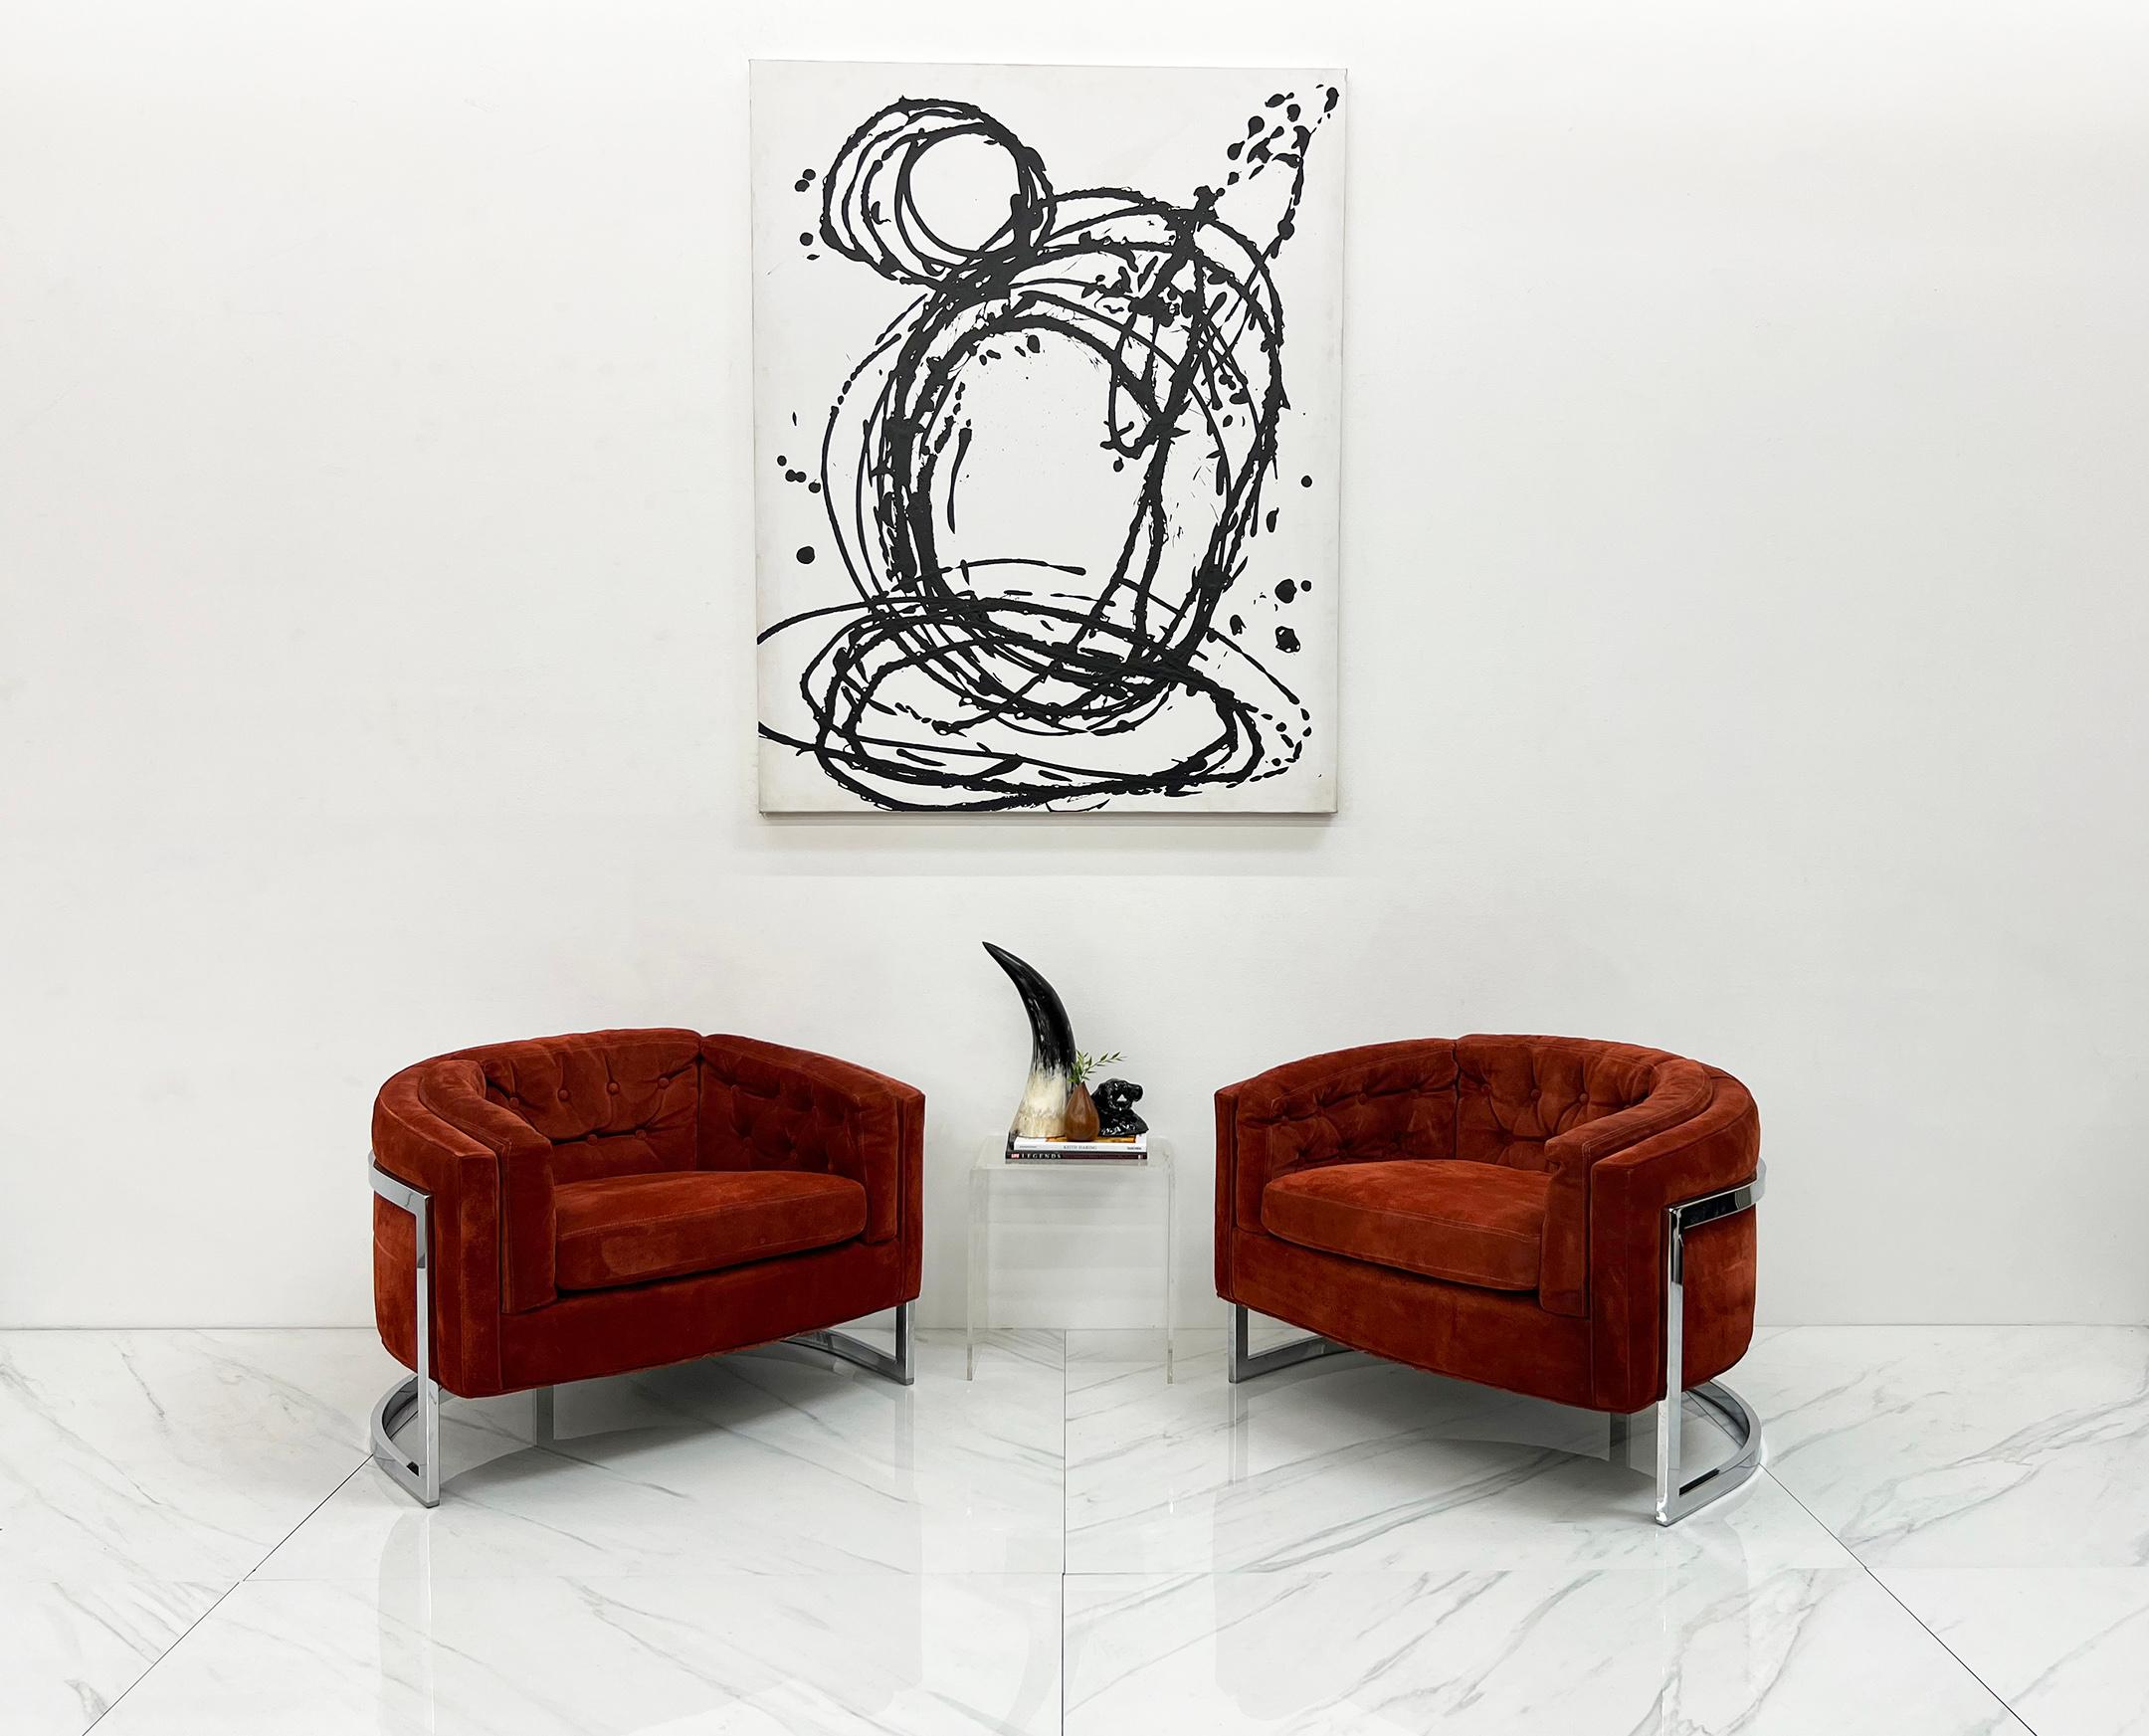 Designed by Adrian Pearsall for Craft, these chairs are gorgeous. With large barrel back chrome T back frames, and ultra luxurious red suede leather upholstery, these chairs are the embodiment of the glam 1970's style.

These ultra comfortable